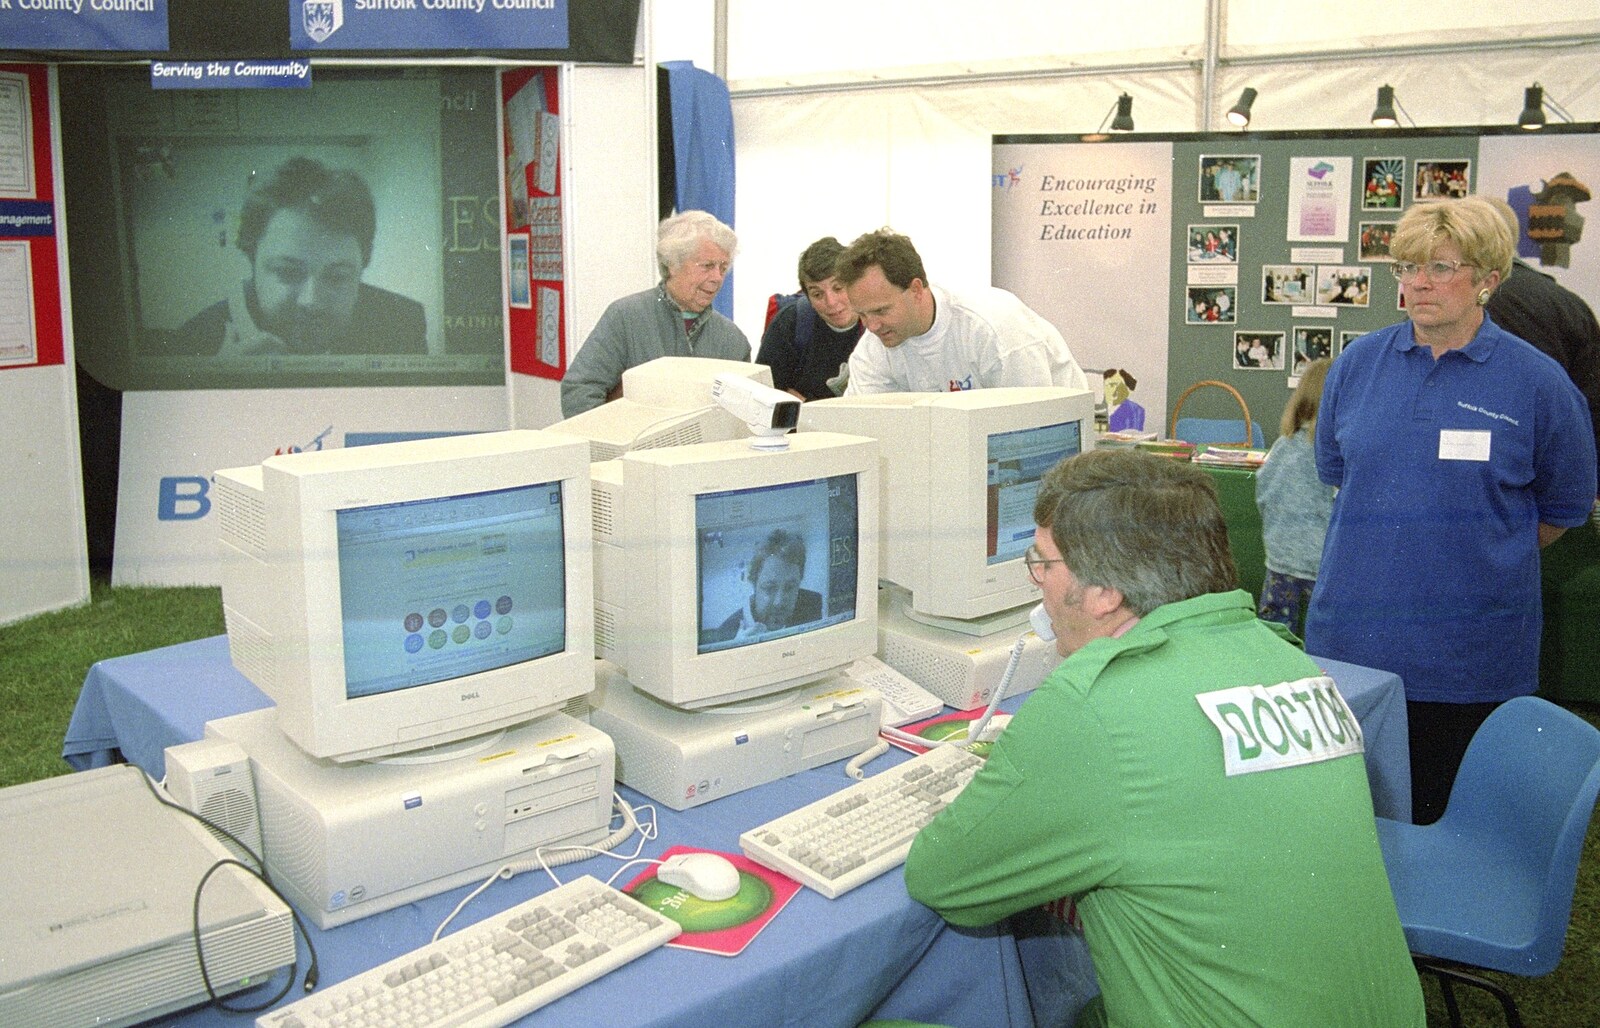 Suffolk County Concillor Chris Mole video-conferences with a Doctor in a tent in a field at the Suffolk Show in 1997. The video is running over a temporary <span class='hilite'><span class='hilite'>ISDN</span></span> line installed by BT for the occasion. The system was also used by a deaf group and it enabled them to use sign language with people not in line of sight for the first time ever.